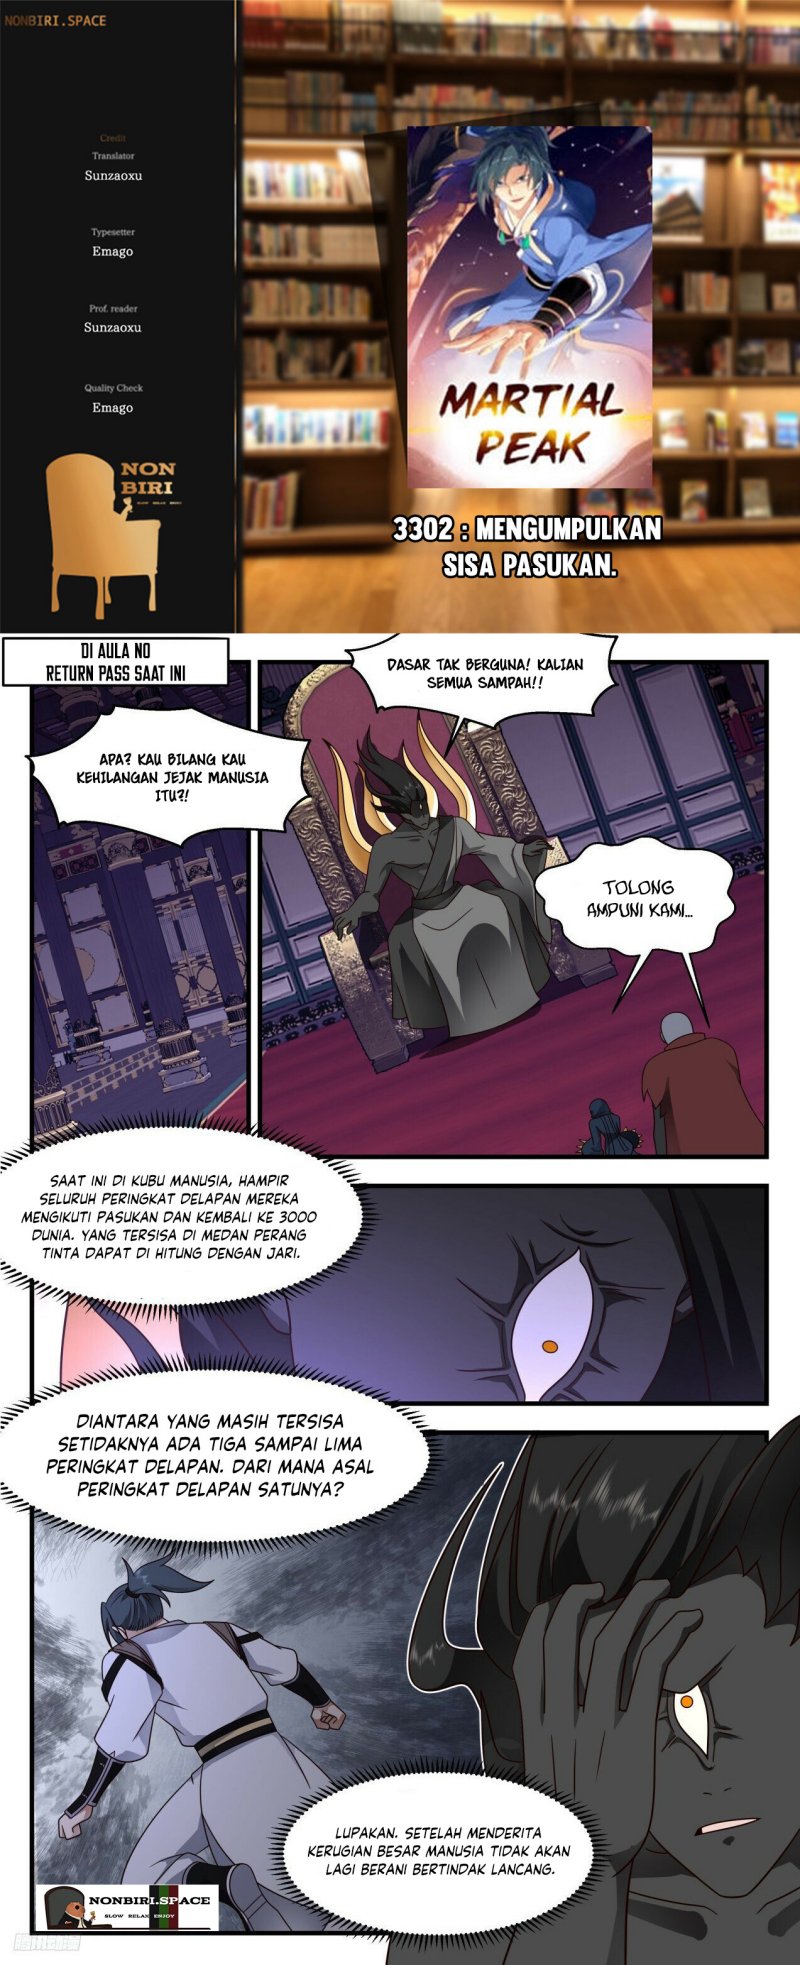 Martial Peak: Chapter 3302 - Page 1